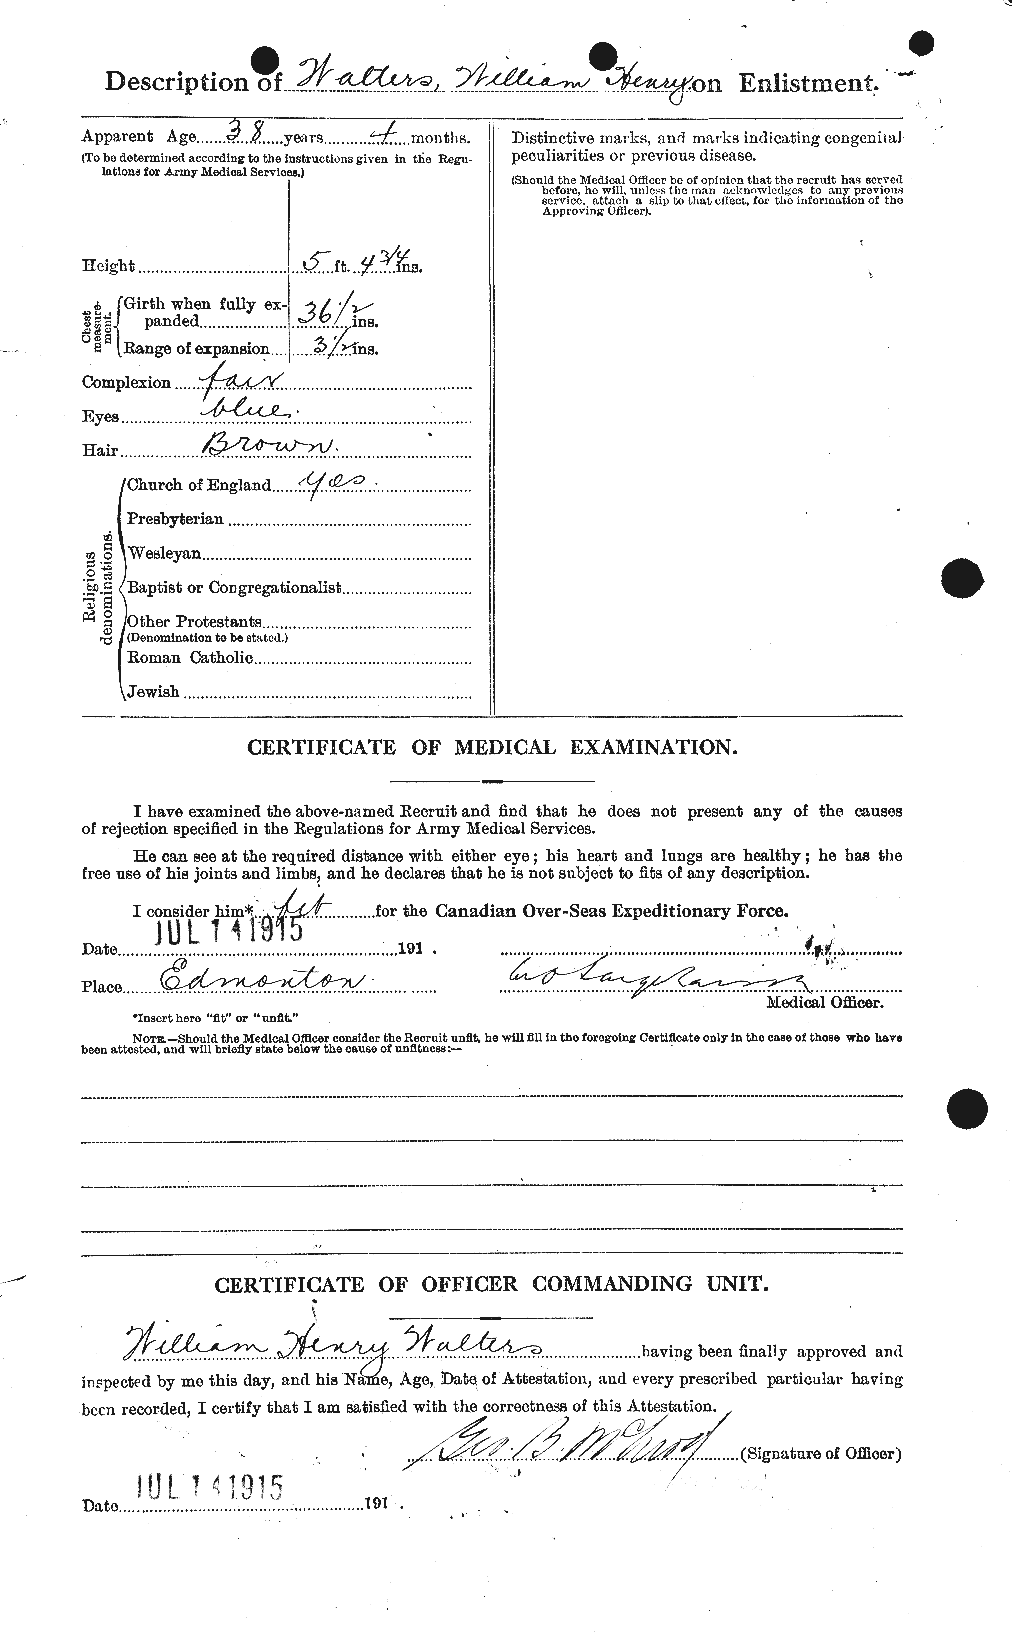 Attestation record: William Henry Walters